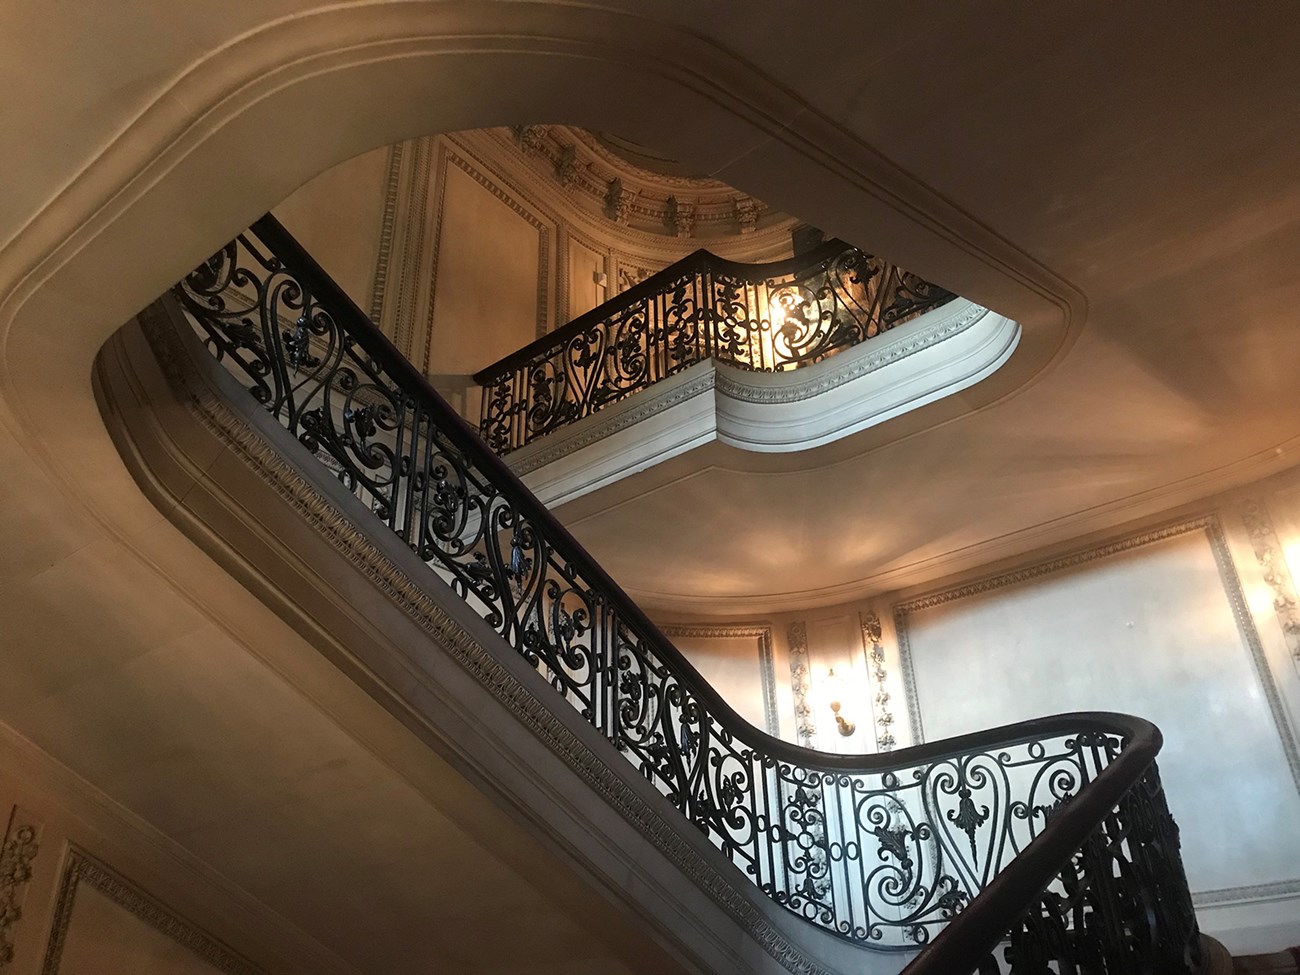 A stone staircase with decorative bronze railing rising three flights.